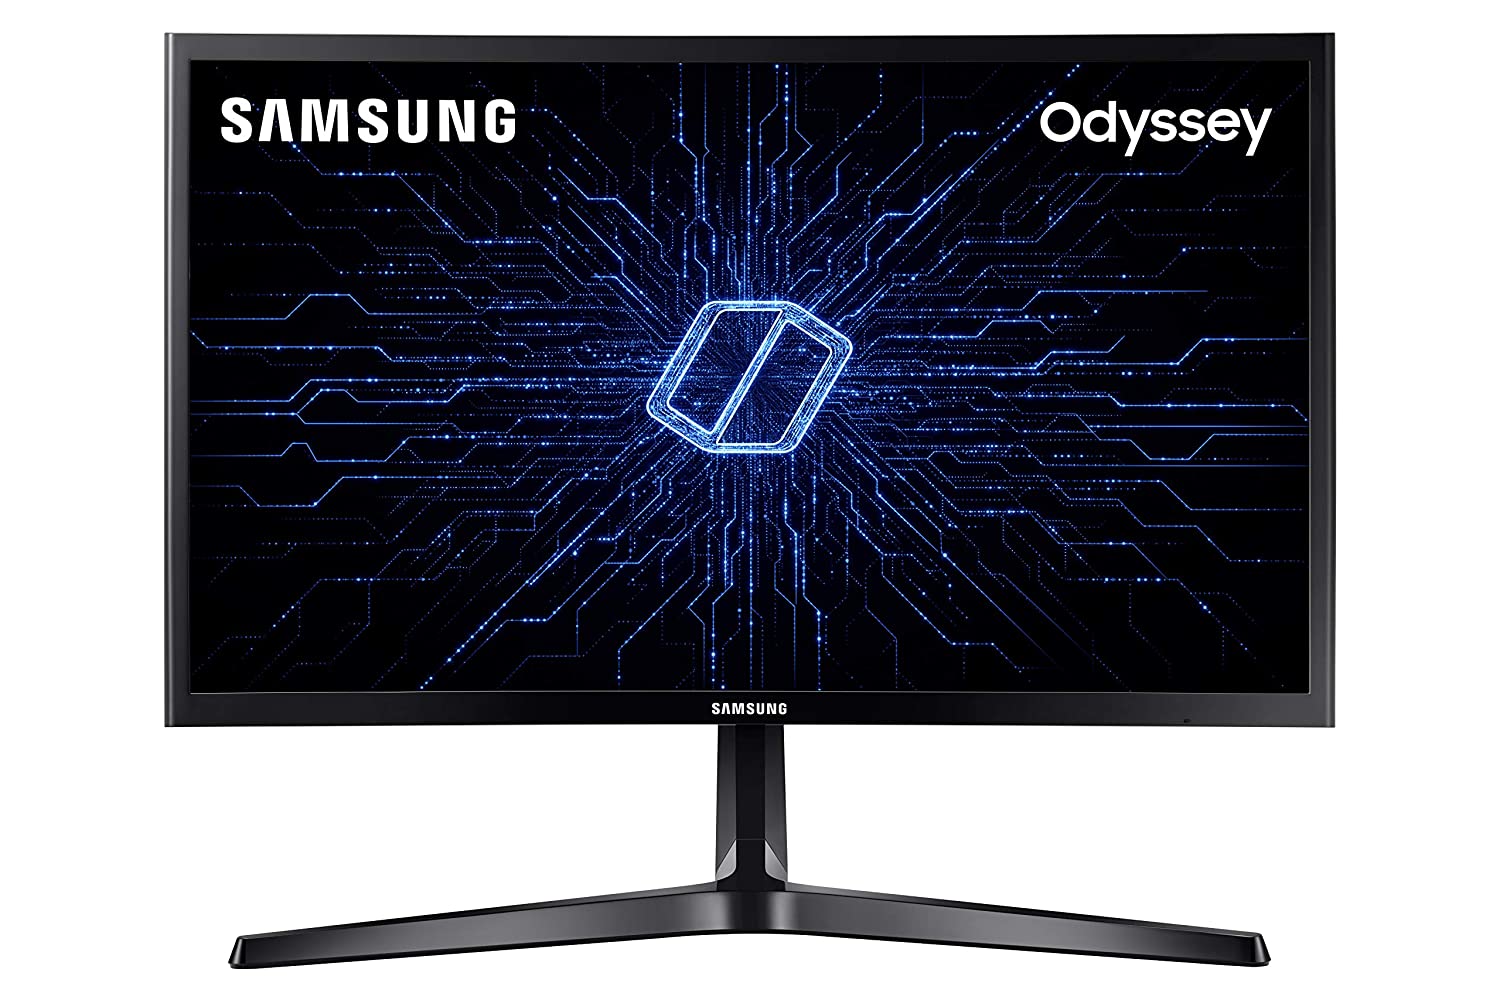 Top 24-inch Monitors with 144Hz Display Under Rs 20,000